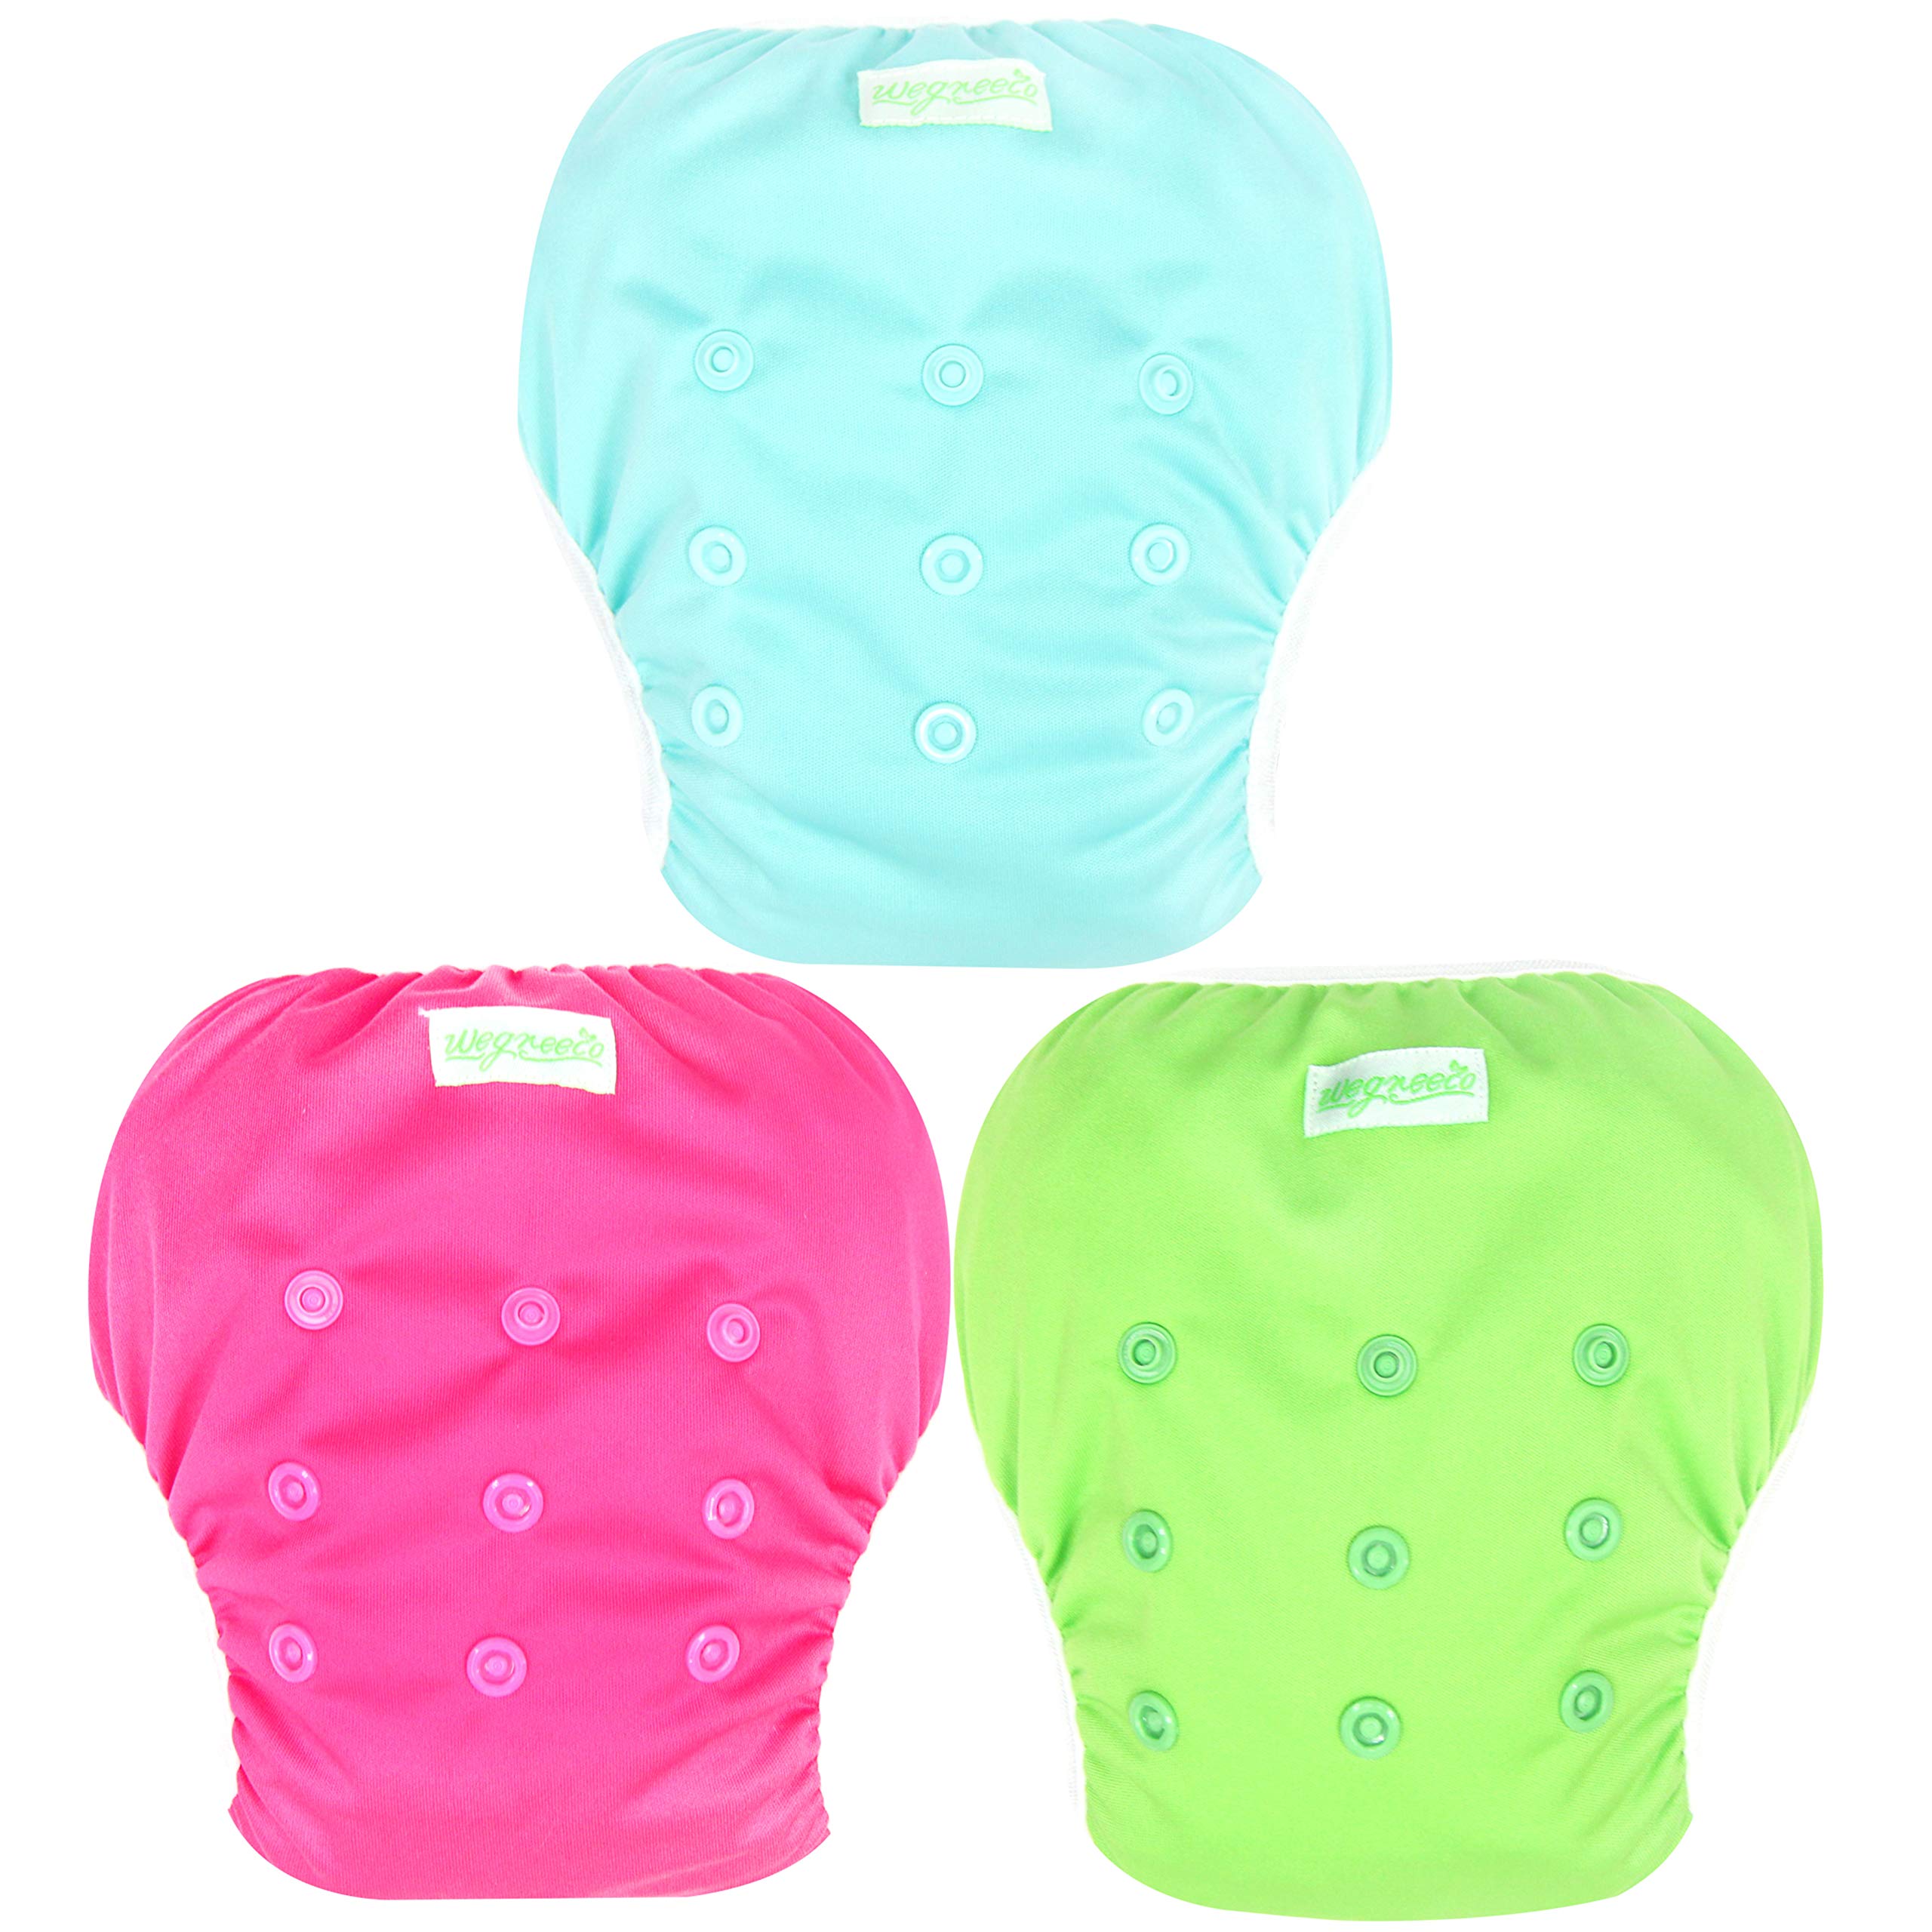 wegreeco Baby & Toddler Snap One Size Adjustable Reusable Baby Swim Diaper (Fresh, Large, 3 Pack)